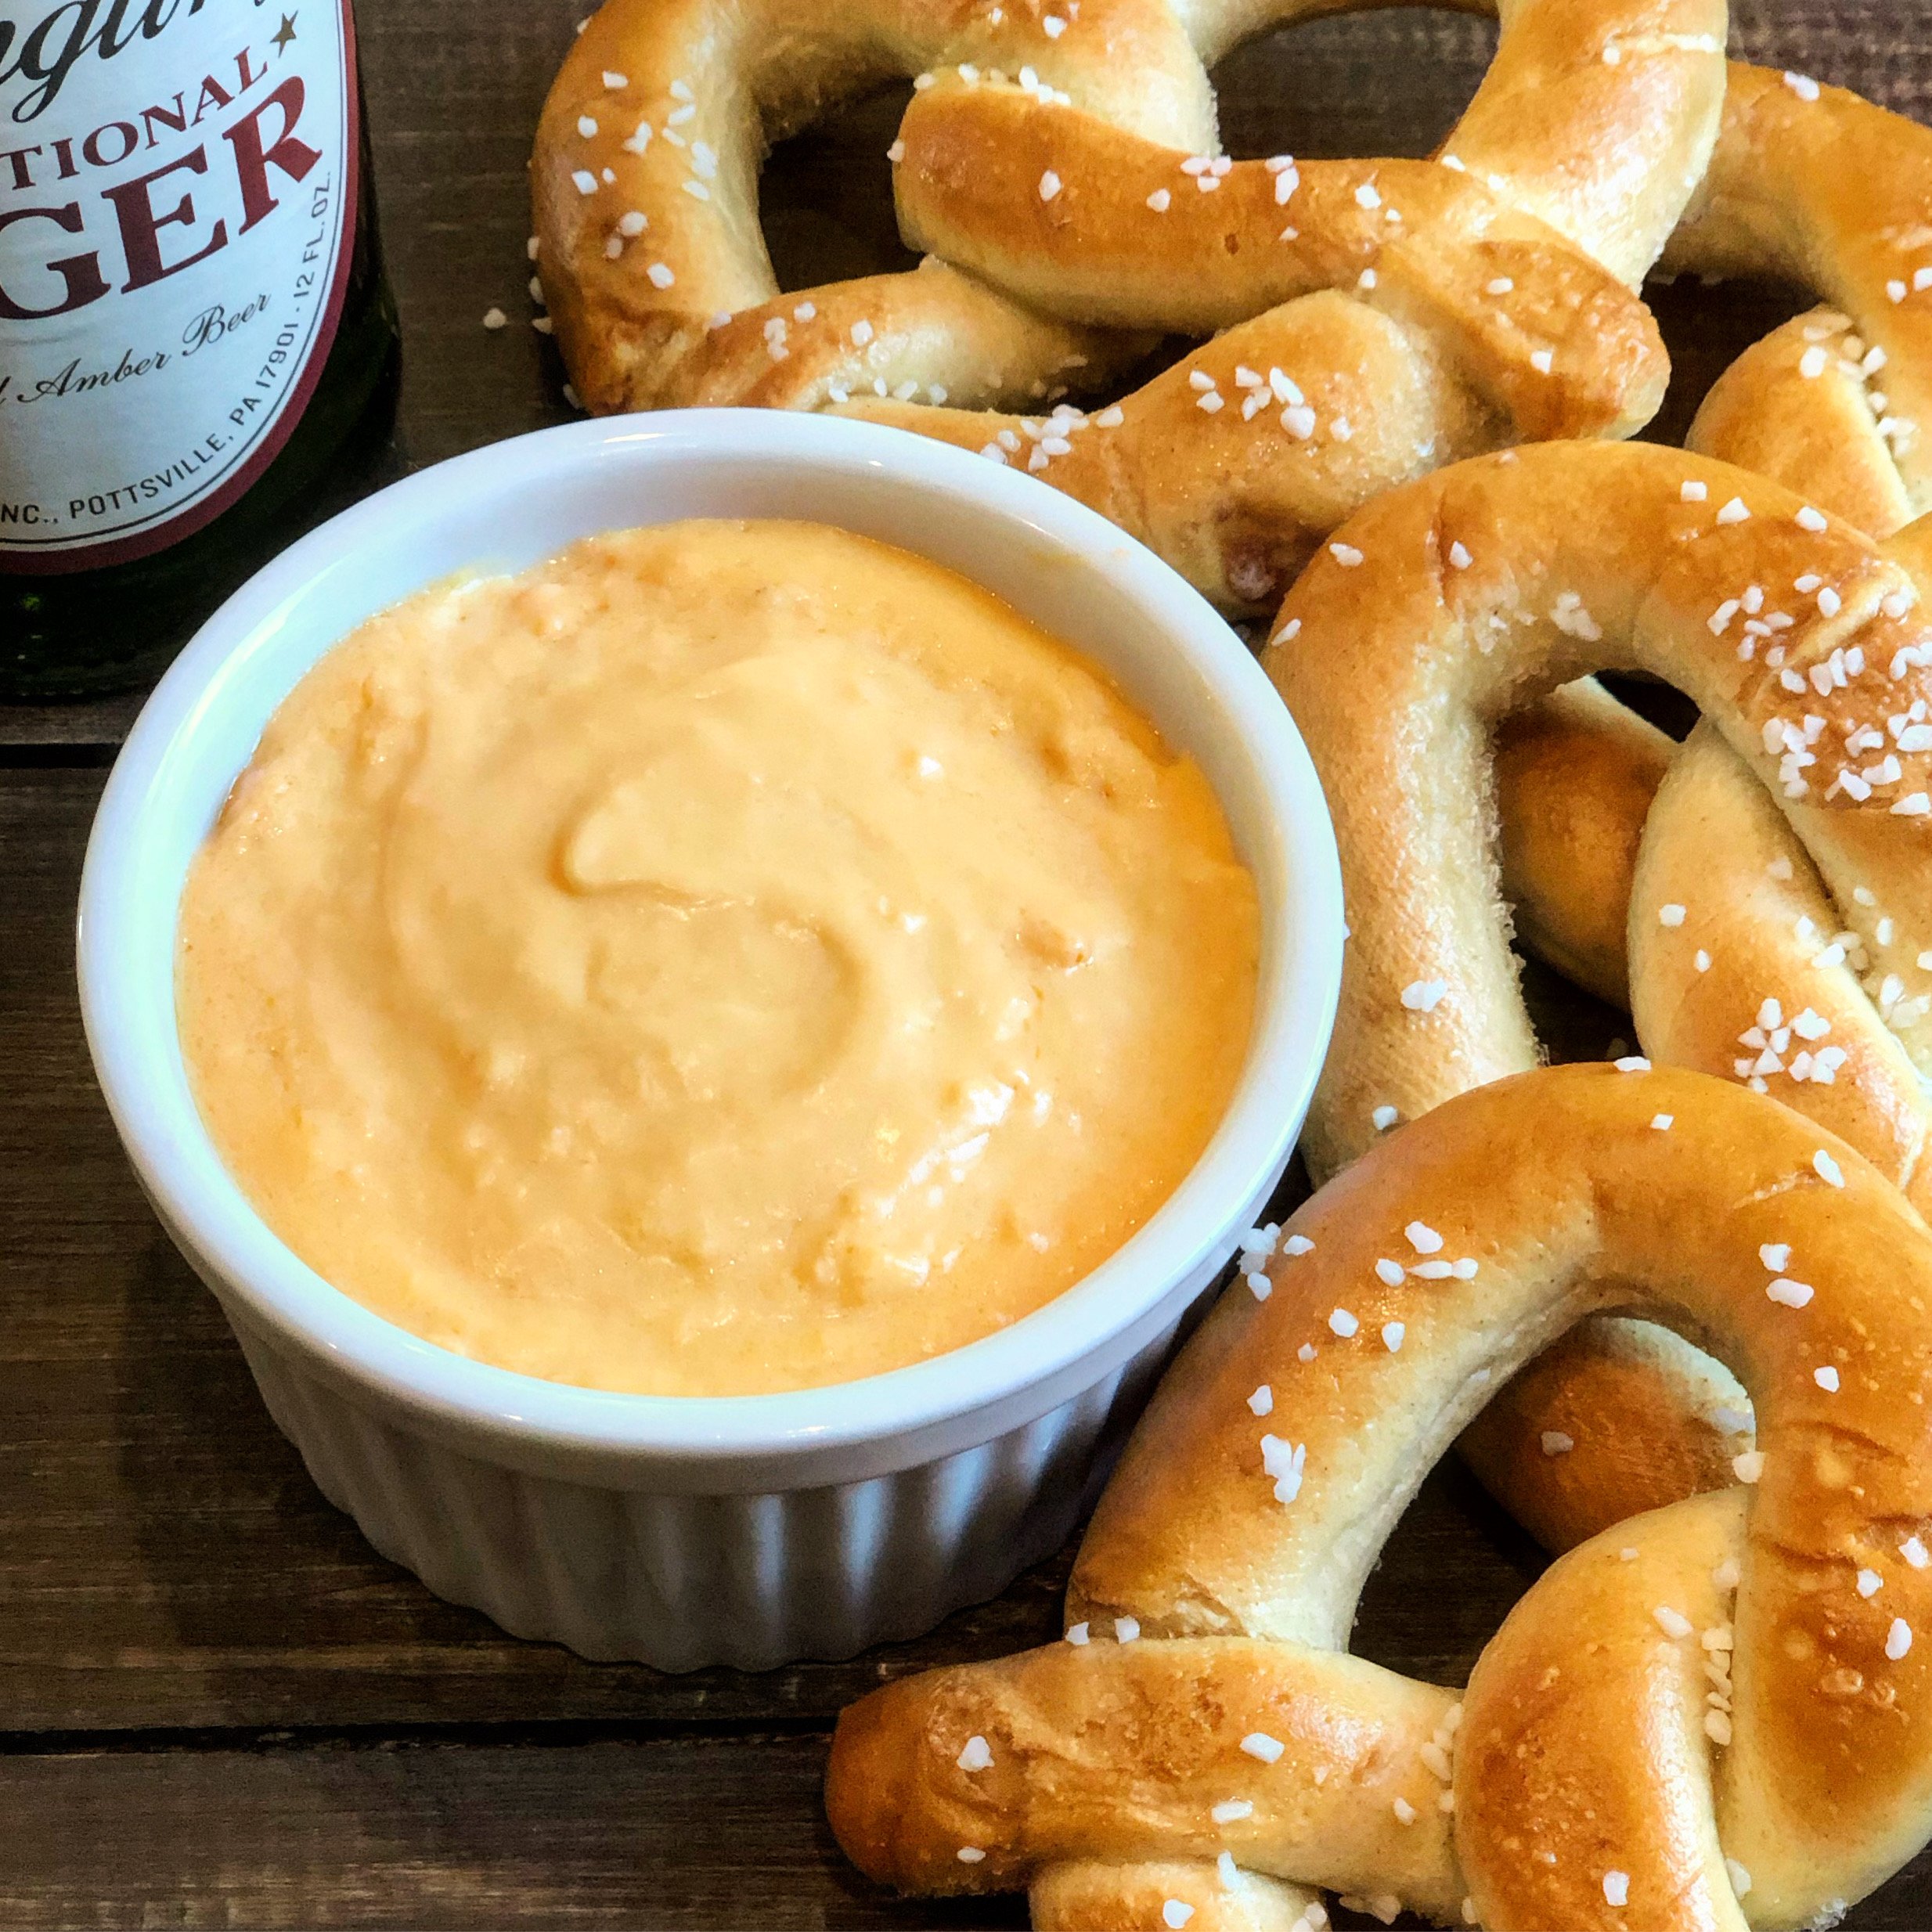 Vegan Pub Style Beer Cheese Dip - All the classic beer cheese flavor you know and love in a quick and easy vegan dip! via @thiswifecooks